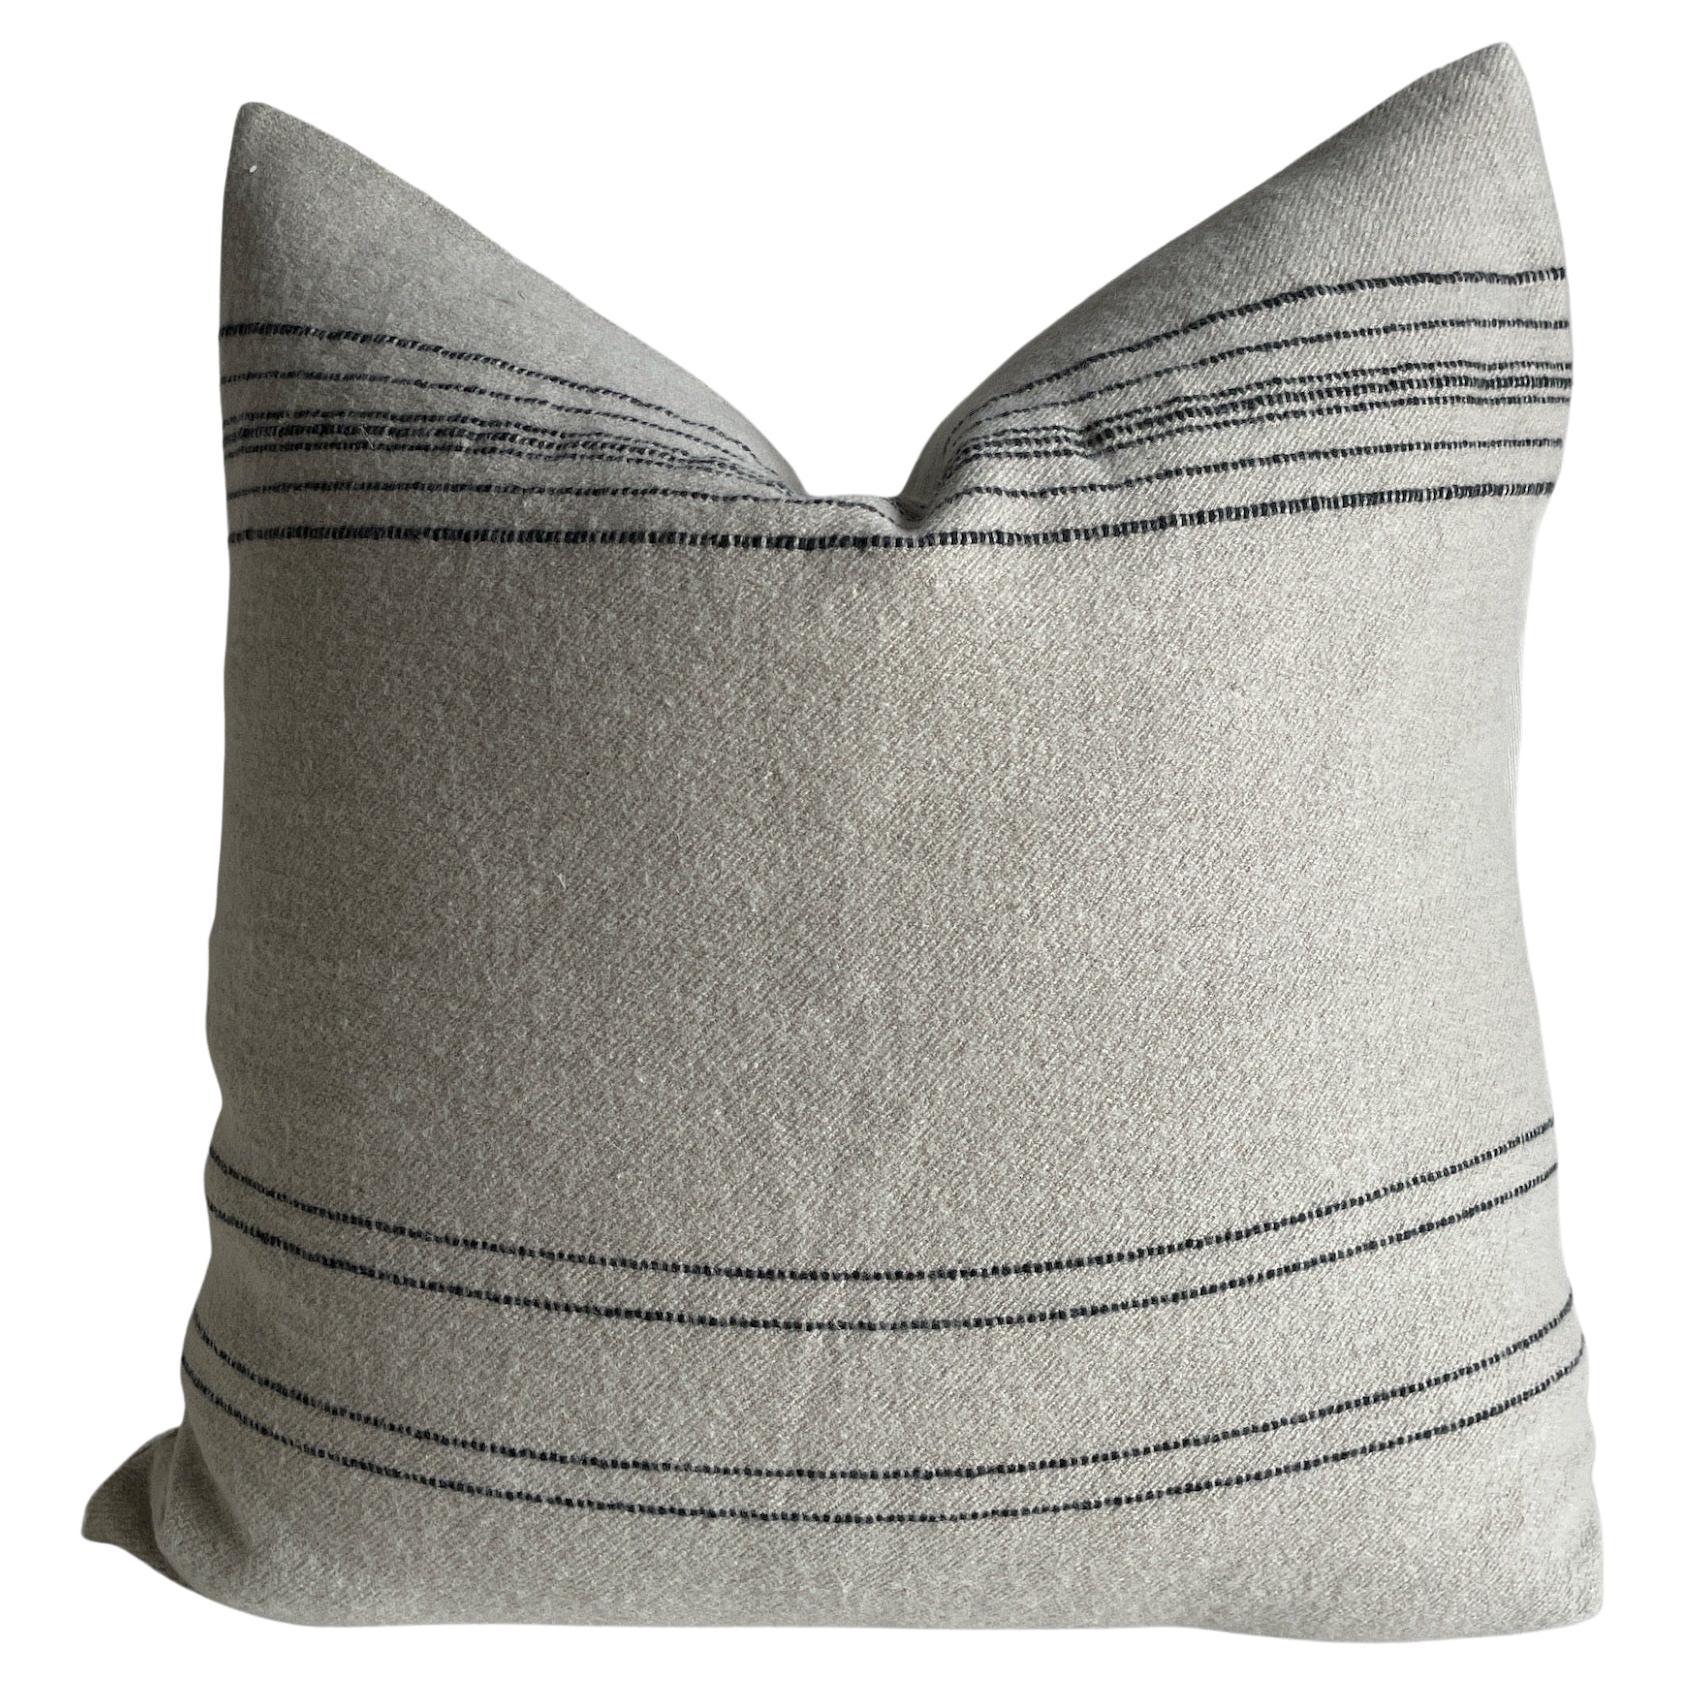 Belgian Linen and Wool Oversize Pillow Cover in Oatmeal and Coal with Insert For Sale